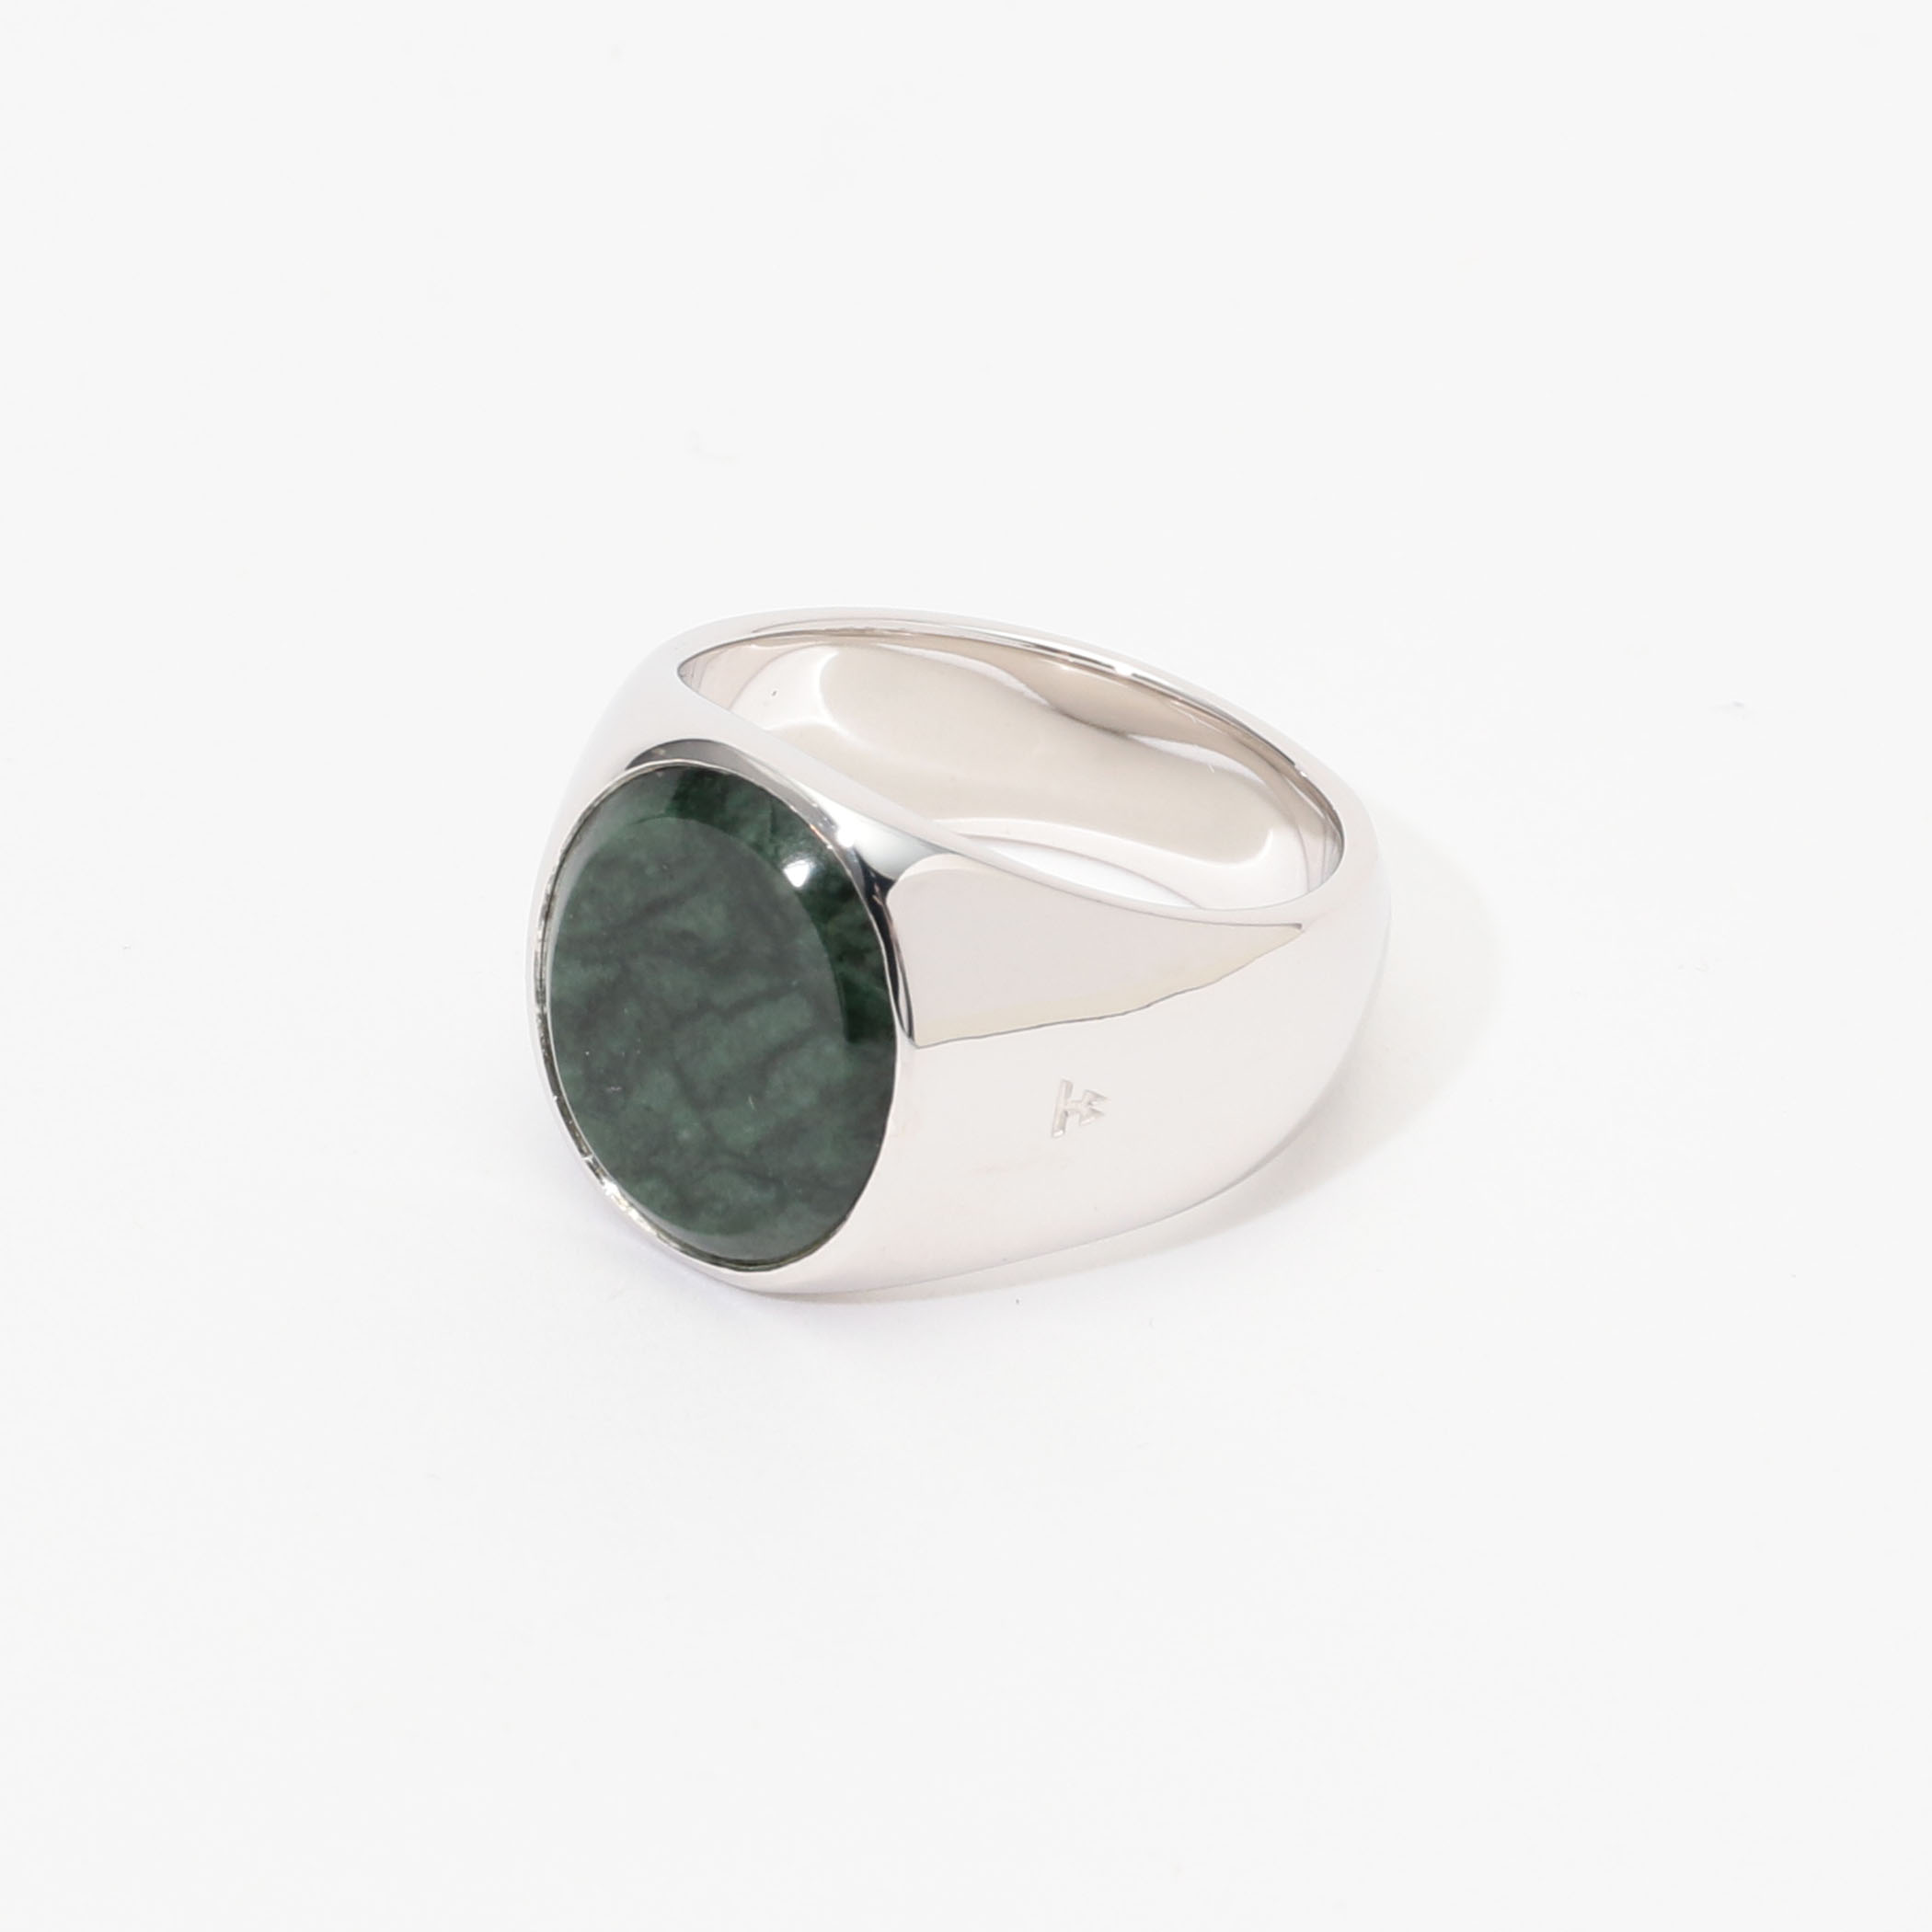 TOM WOOD OVAL GREEN MARBLE リング｜トゥモローランド 公式通販